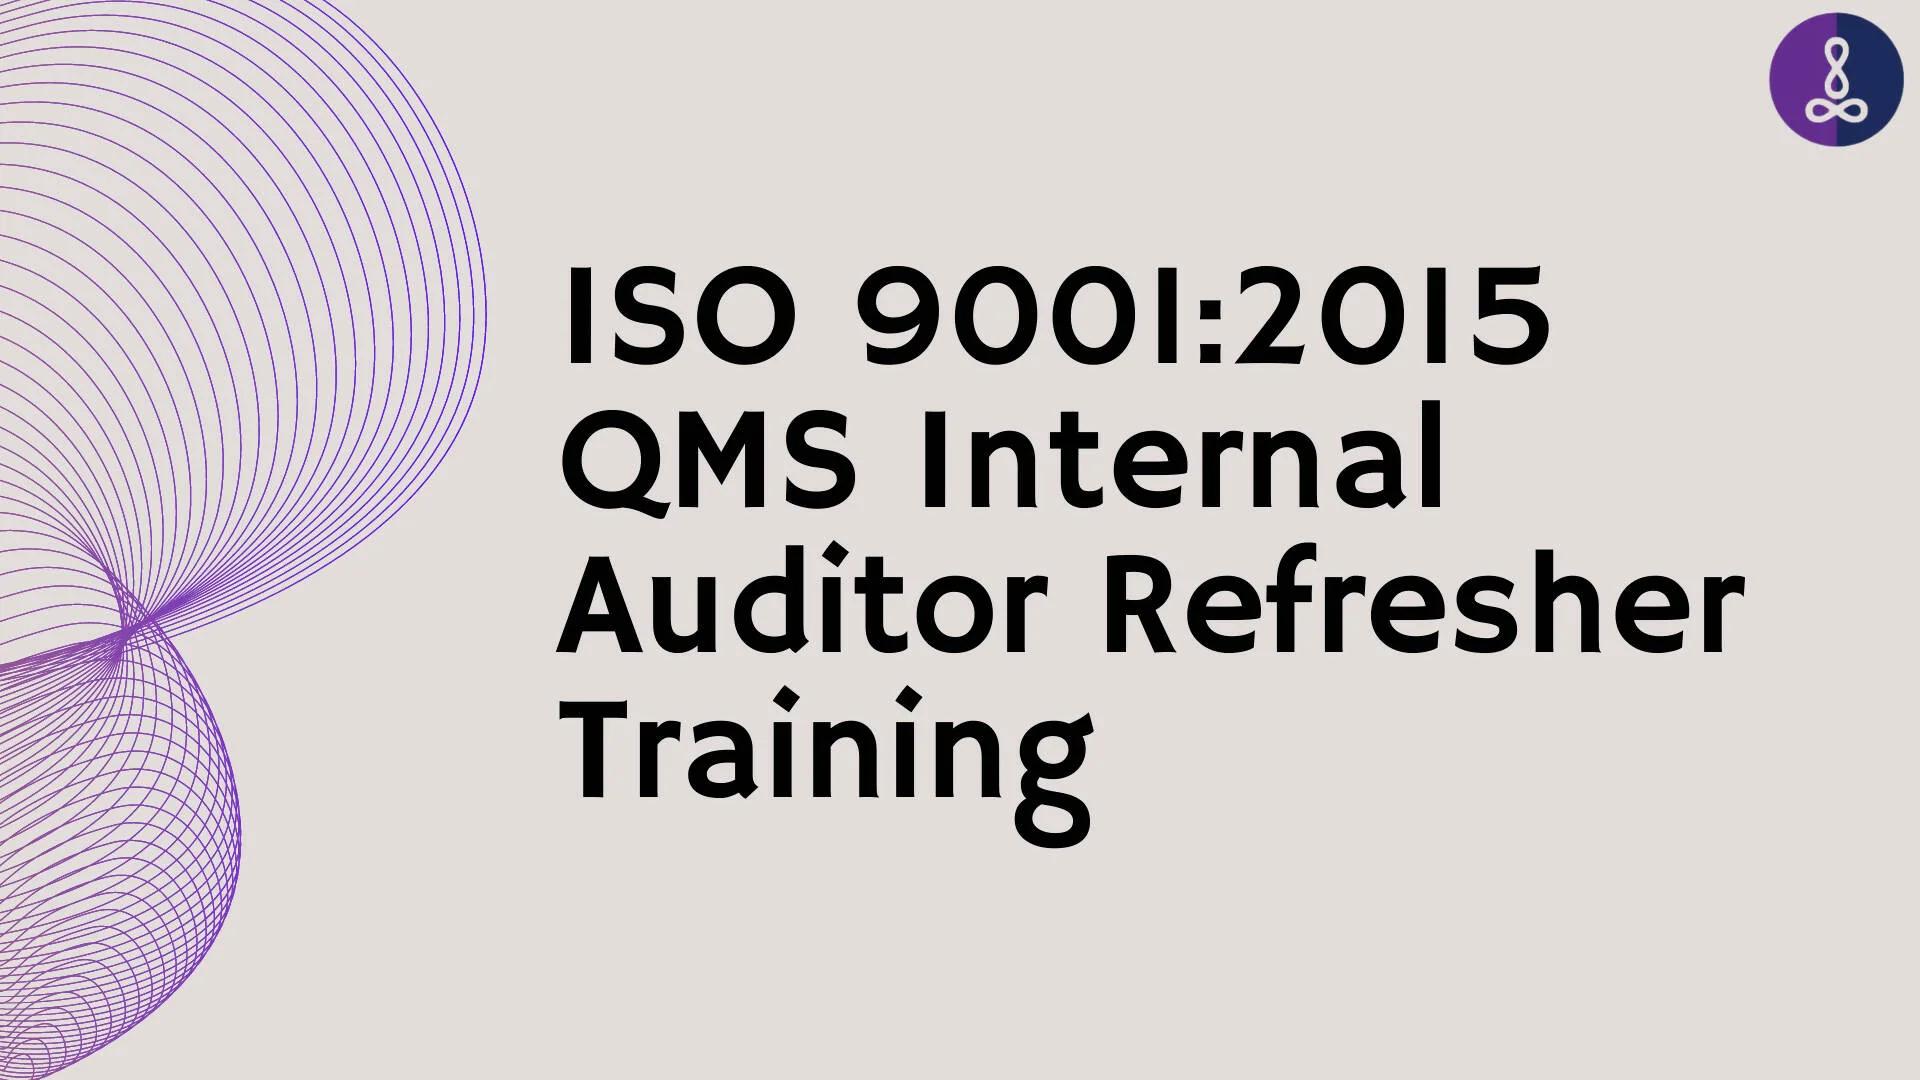 qms internal auditor training - What is QMS internal auditor